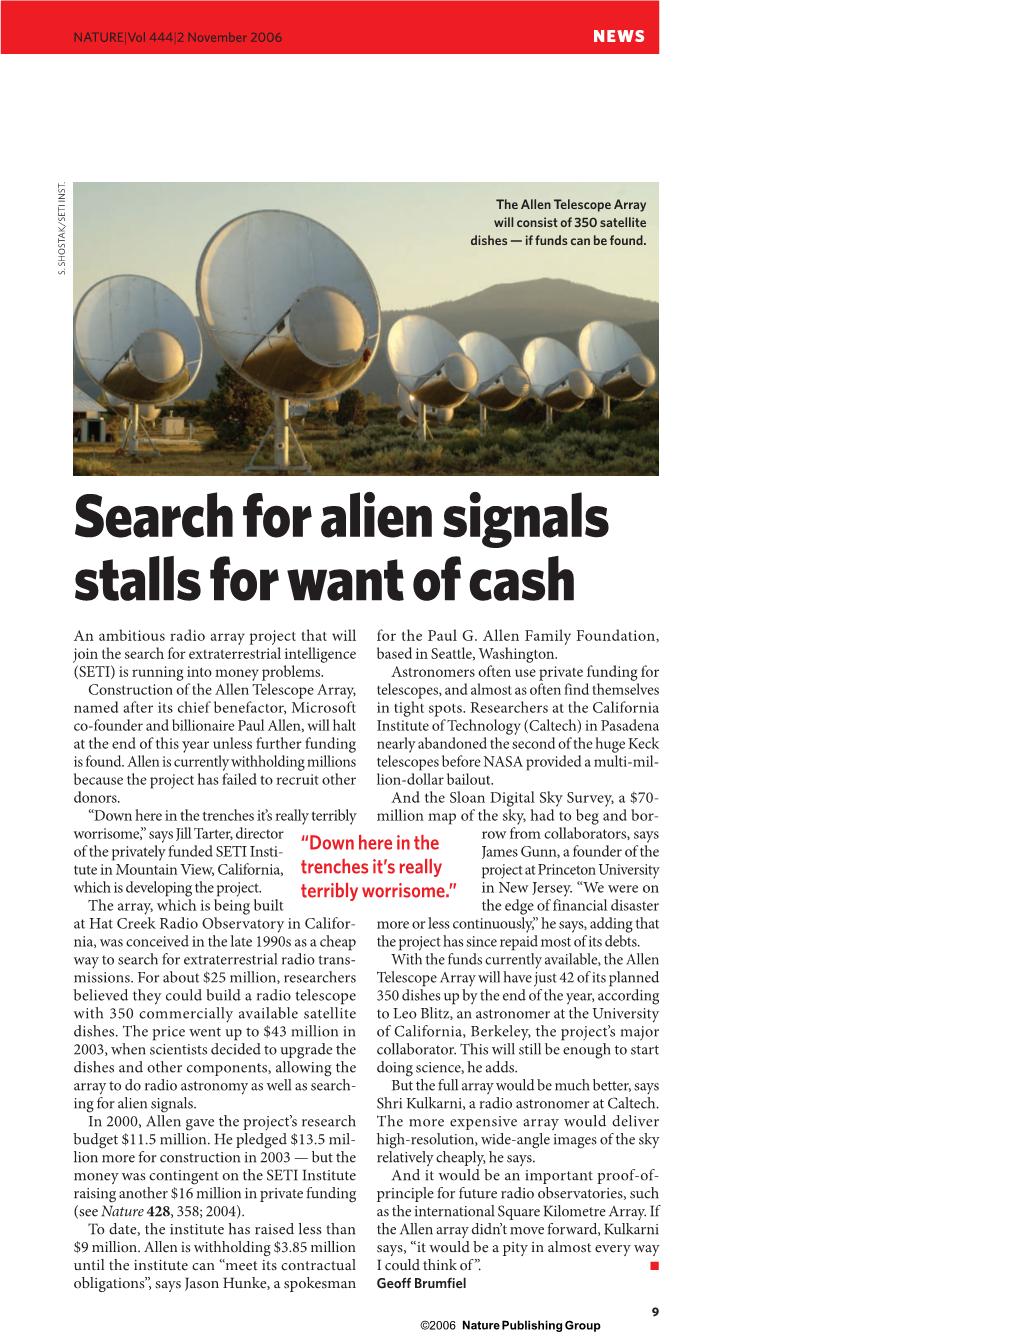 Search for Alien Signals Stalls for Want of Cash